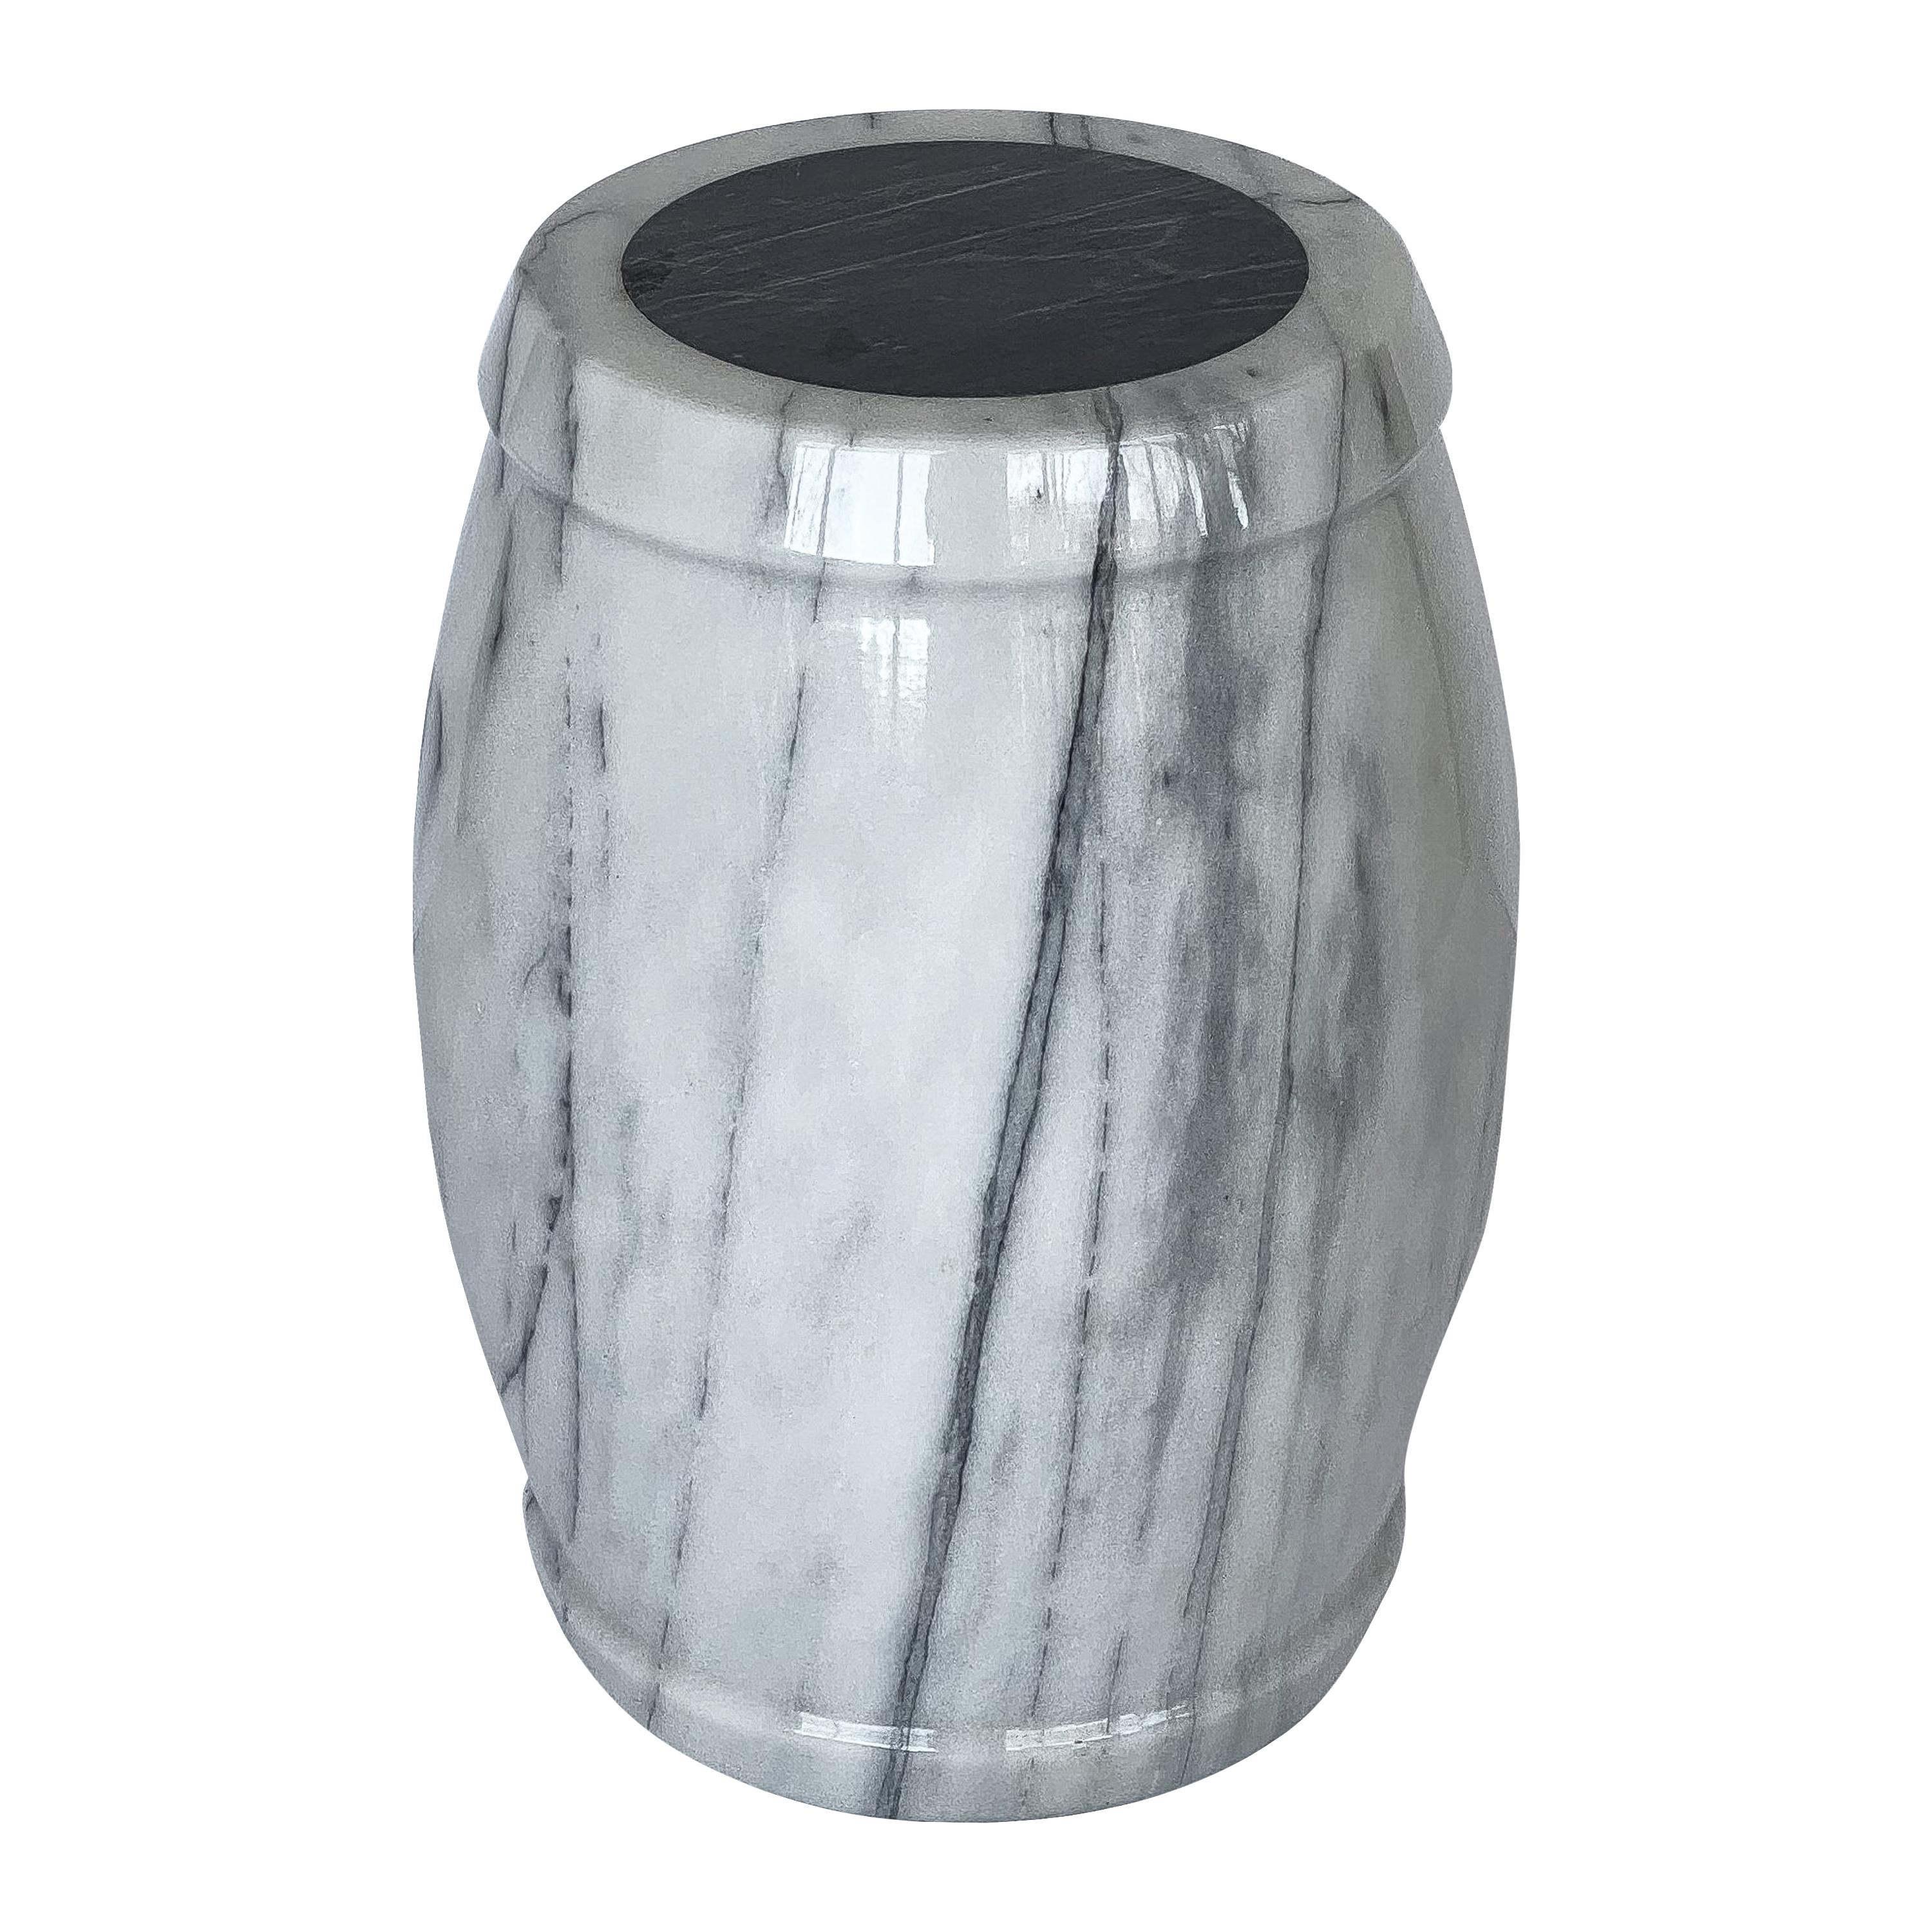 Marble Stool or Side Table